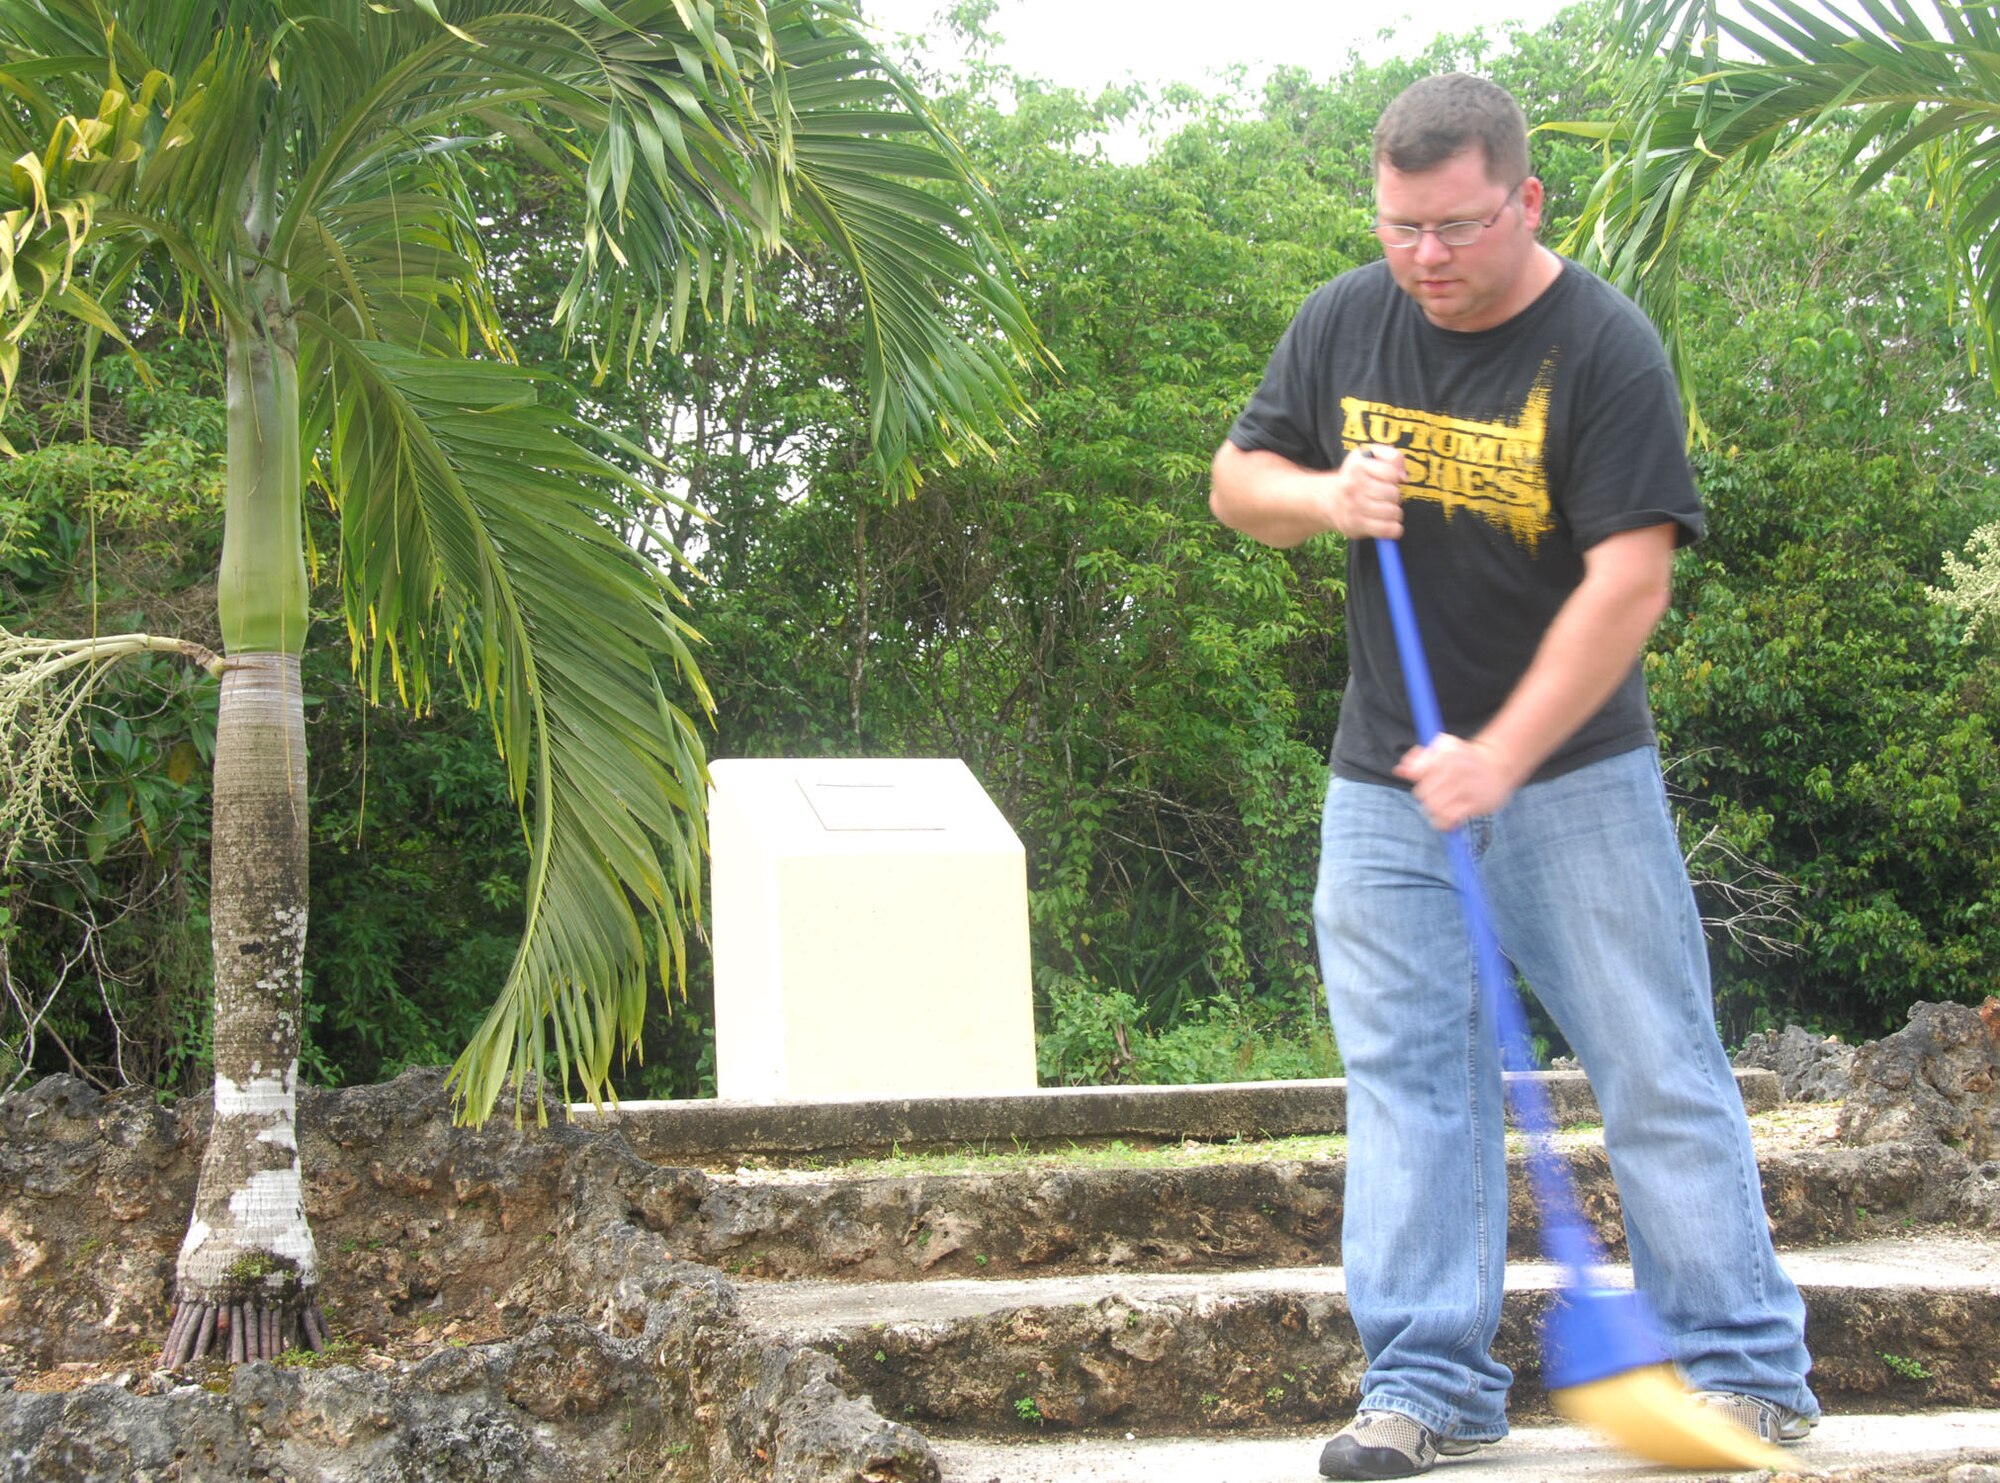 ANDERSEN AIR FORCE BASE, Guam - Senior Airman Shane Dunaway, 36th Wing Public Affairs editor and First Four Council president, sweeps debris from the steps of the Air Force Sergeants Association Chapter 1560-sponsored World War II Memorial June 6. The Andersen First Four Council provides an outlet for Airmen seeking professional growth and strives to be an active part of improving the morale, welfare and quality of life of their peers. (U.S. Air Force photo by Senior Airman Robin Lumm)